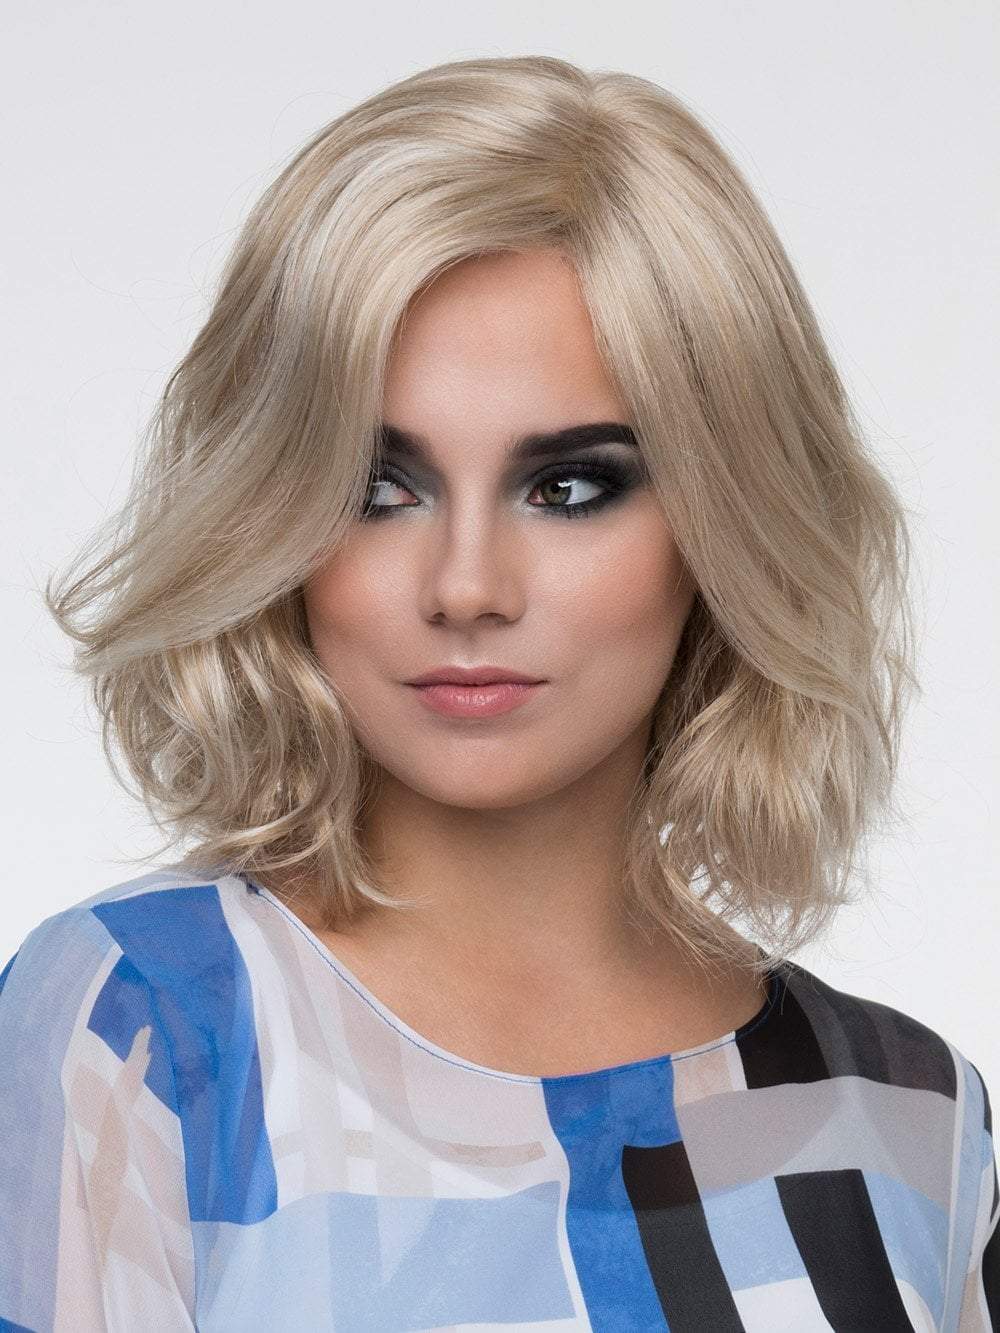 Long layers and lazy waves turn the classic bob into every woman's dream 'do